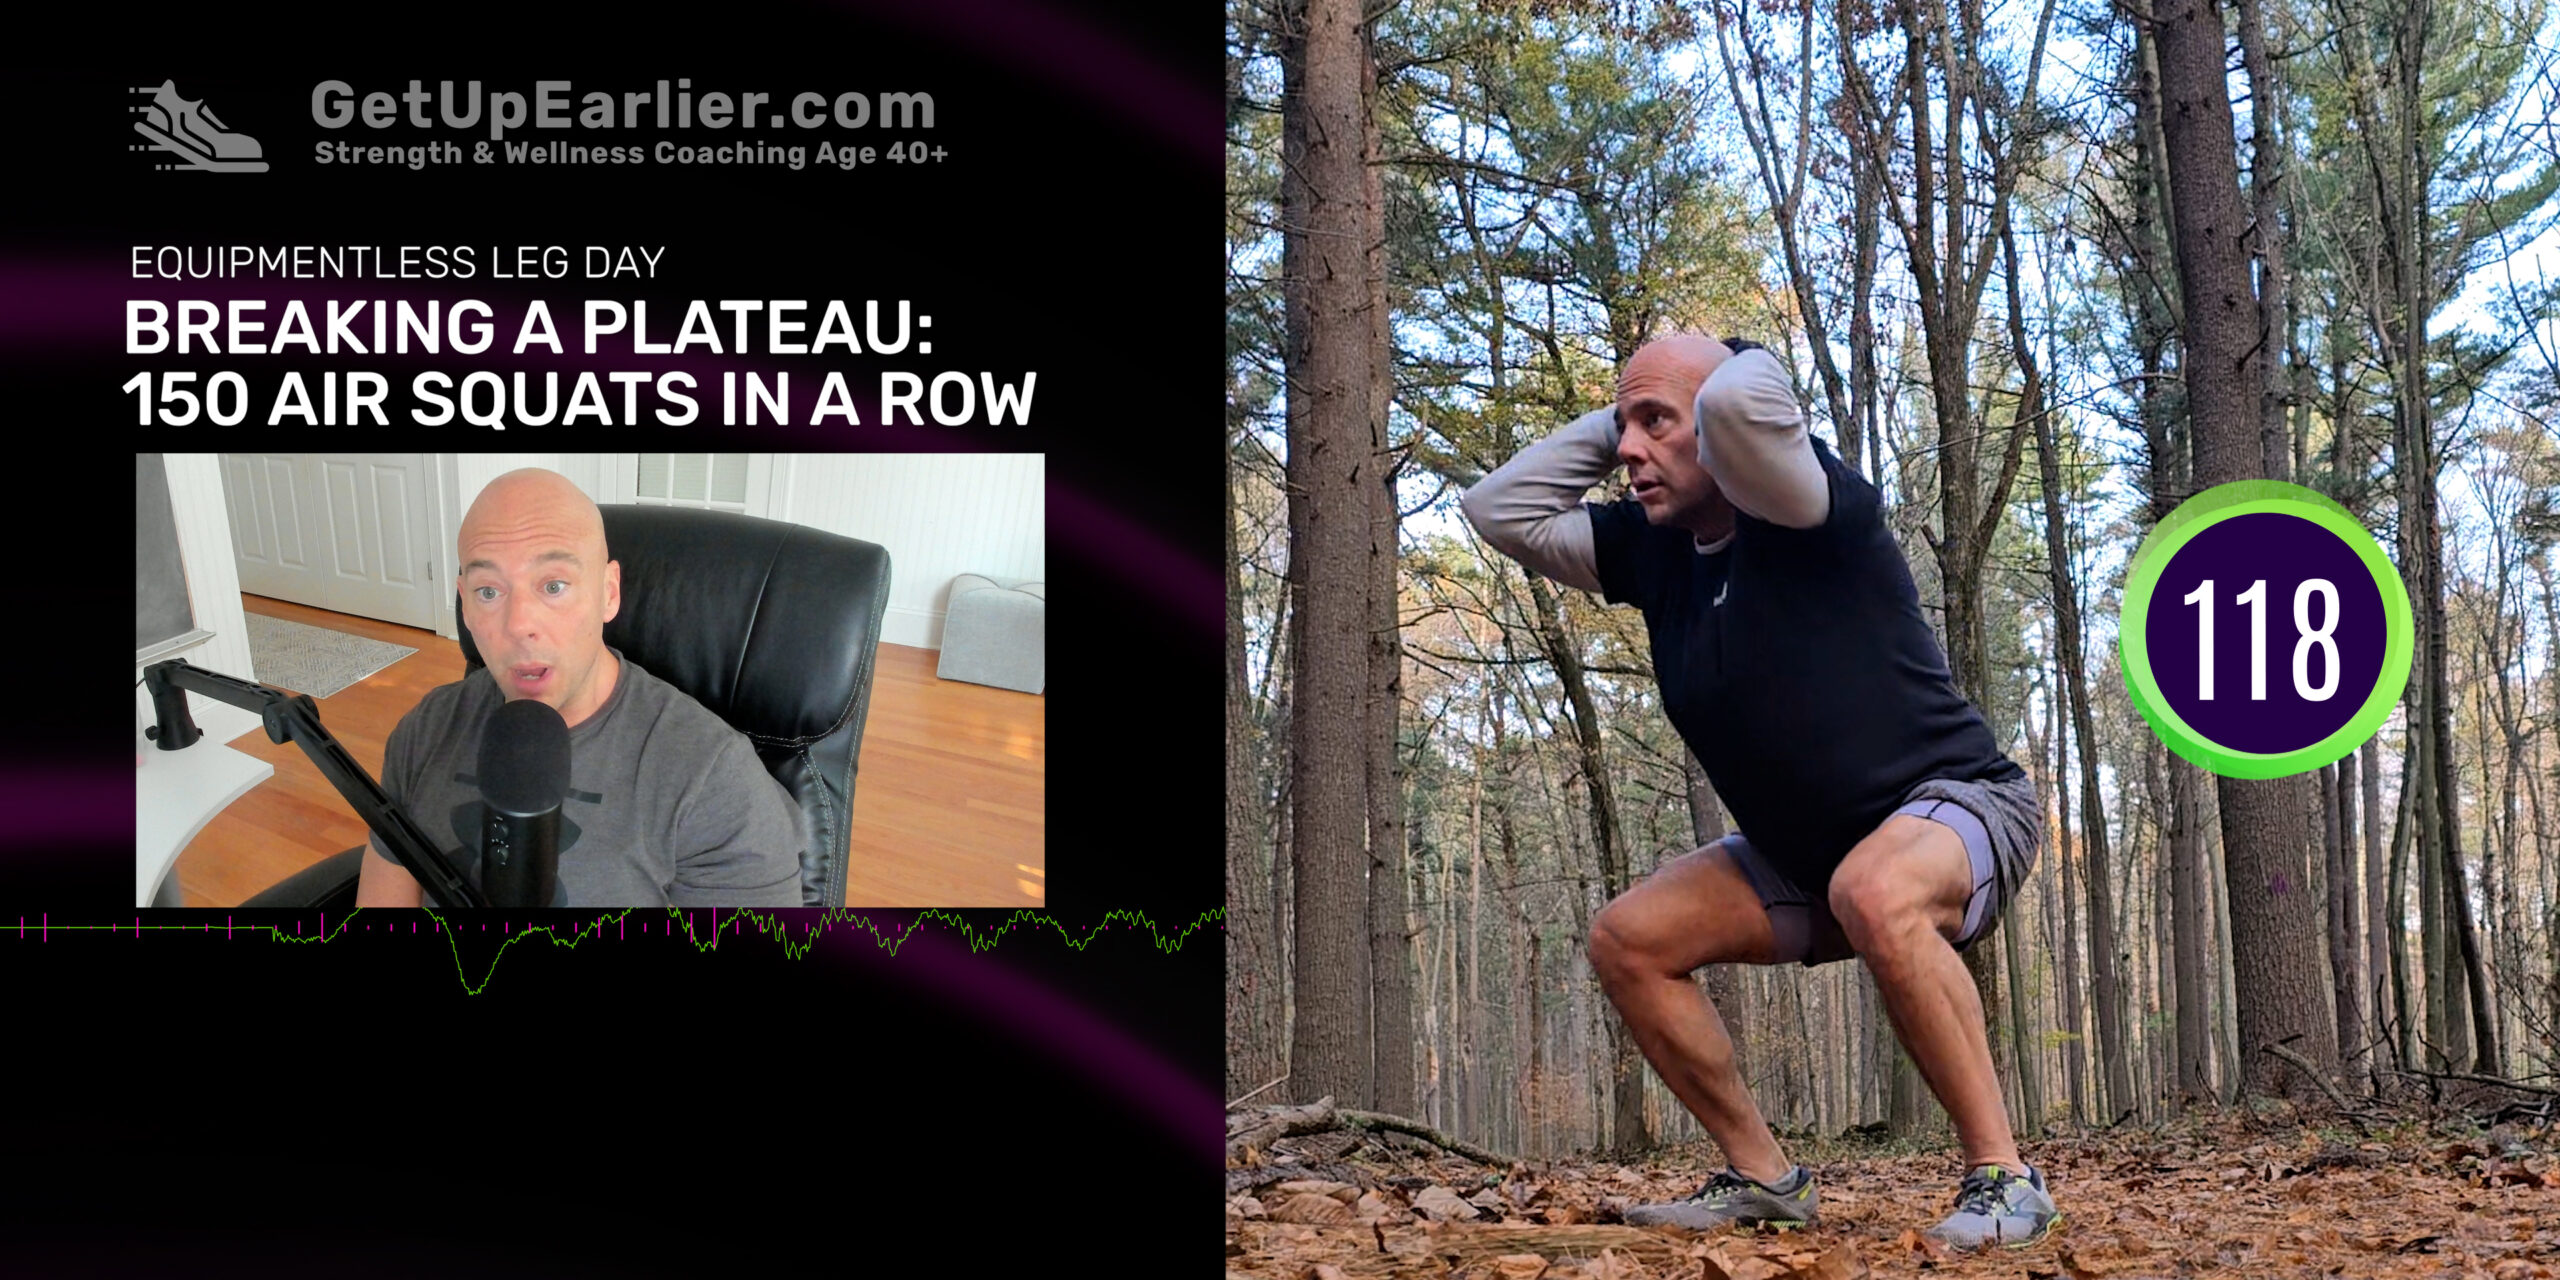 Featured image for “Equipmentless Leg Day with Calisthenics to Break a Plateau – 150 Air Squats in a Row @thatsgoodmoney”